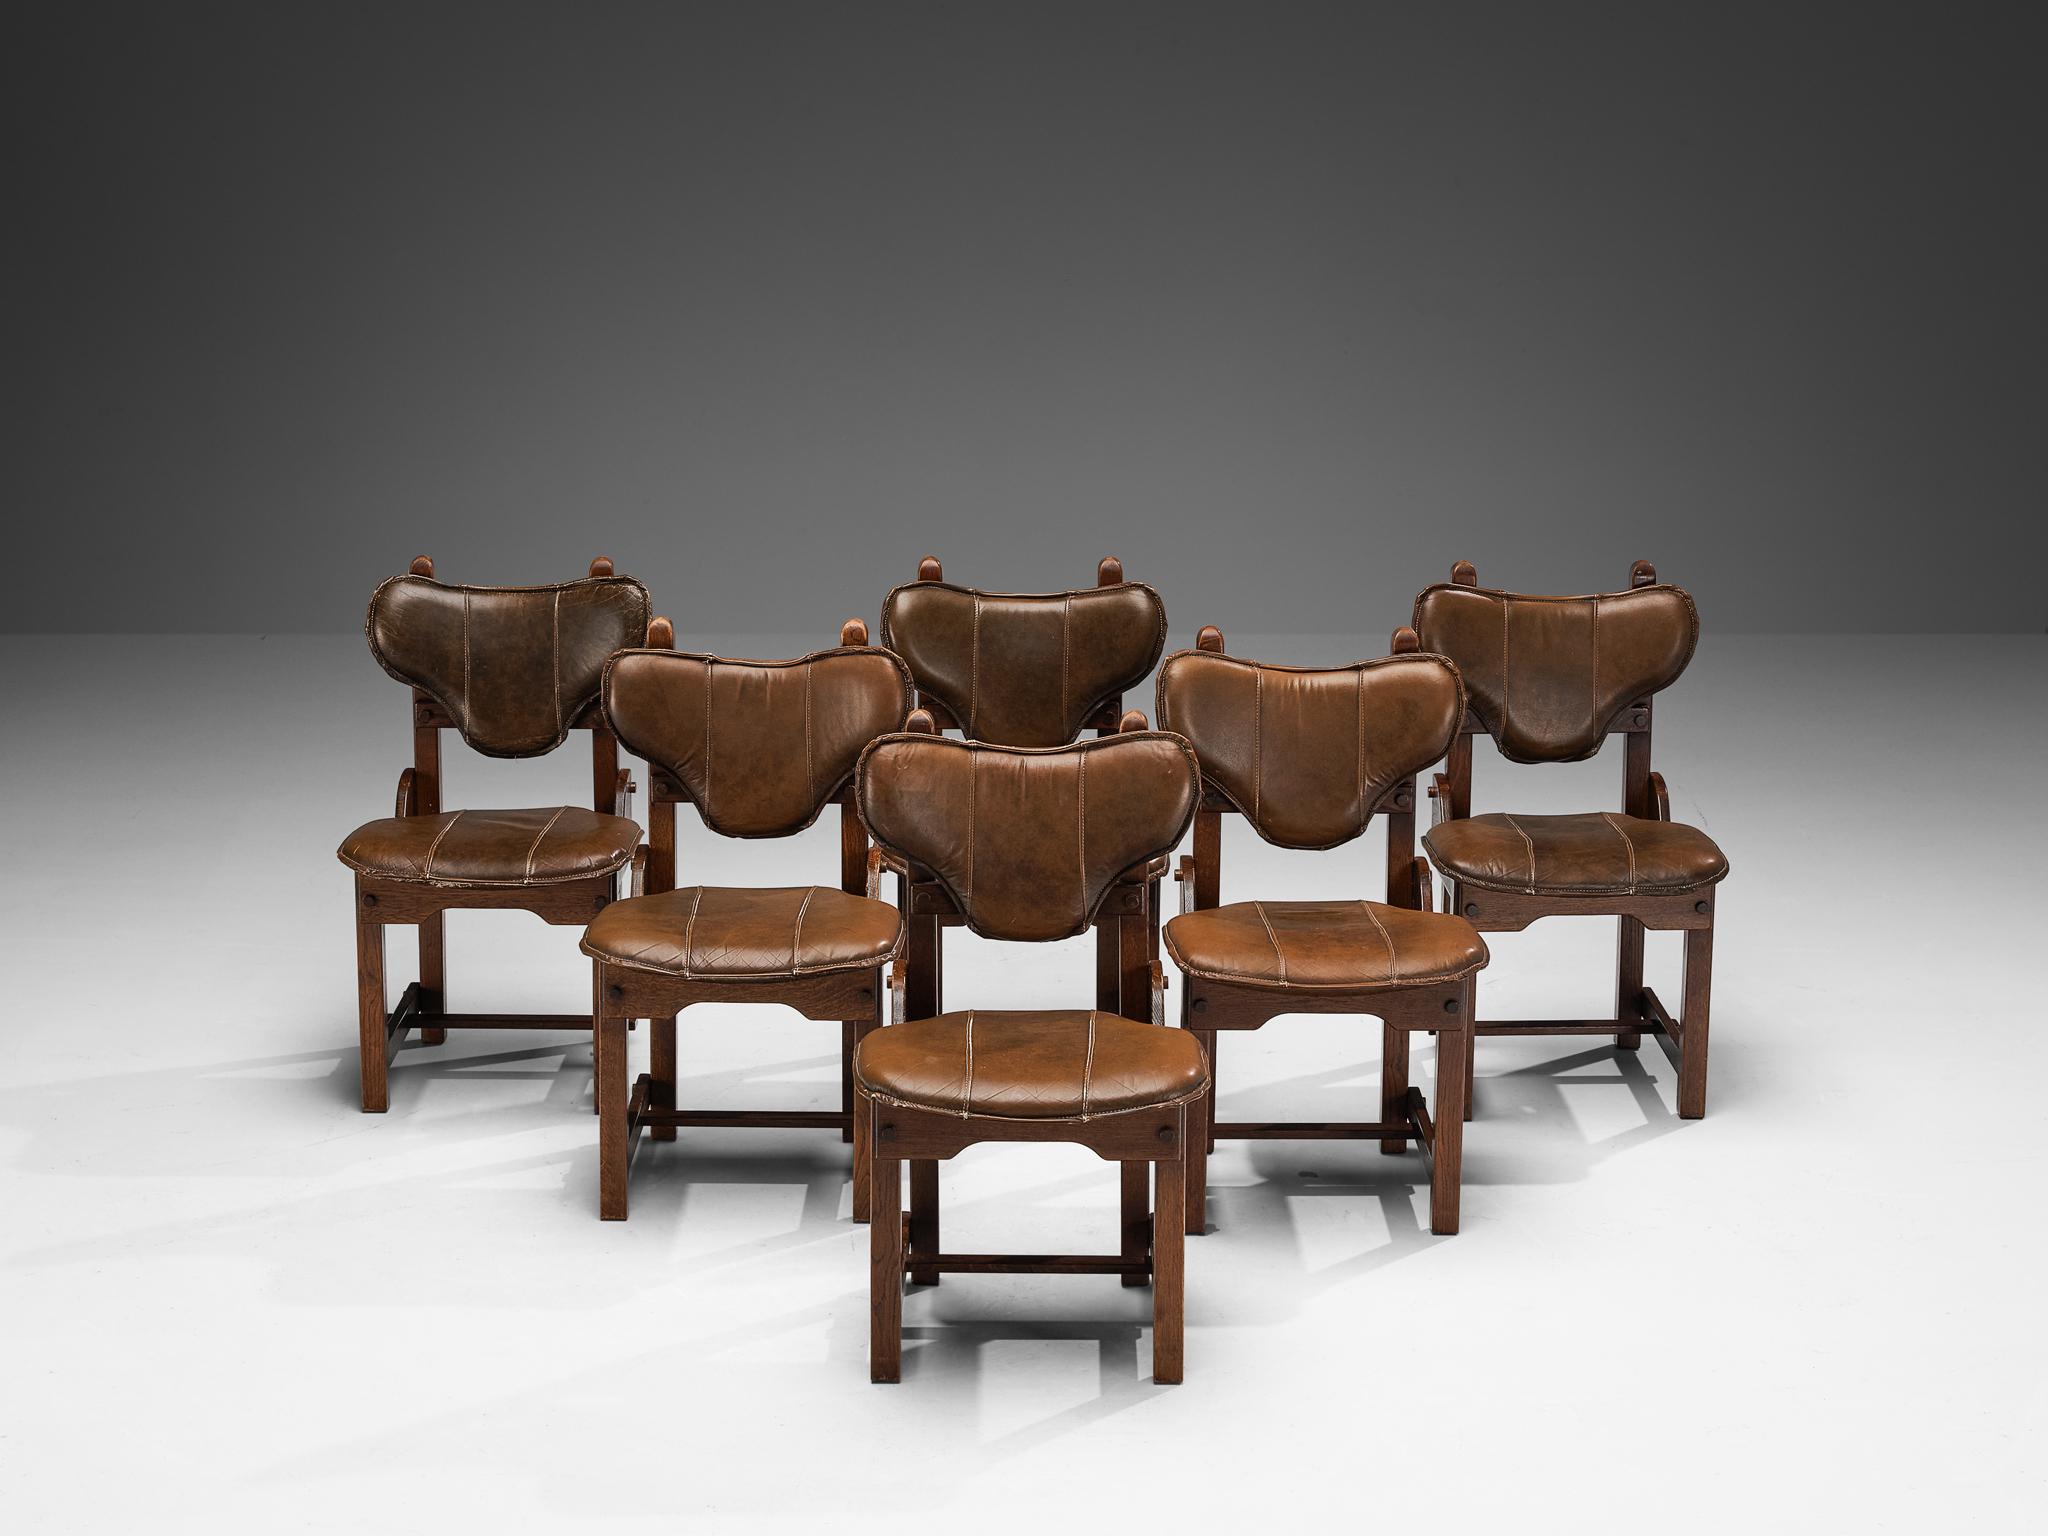 Set of six dining chairs, oak, leather, The Netherlands, 1960s

Distinctive set of chairs with a brutalist look composed of sturdy shapes and contrasting play of lines. The backrest captivates the eye by means of the triangle-shaped form with